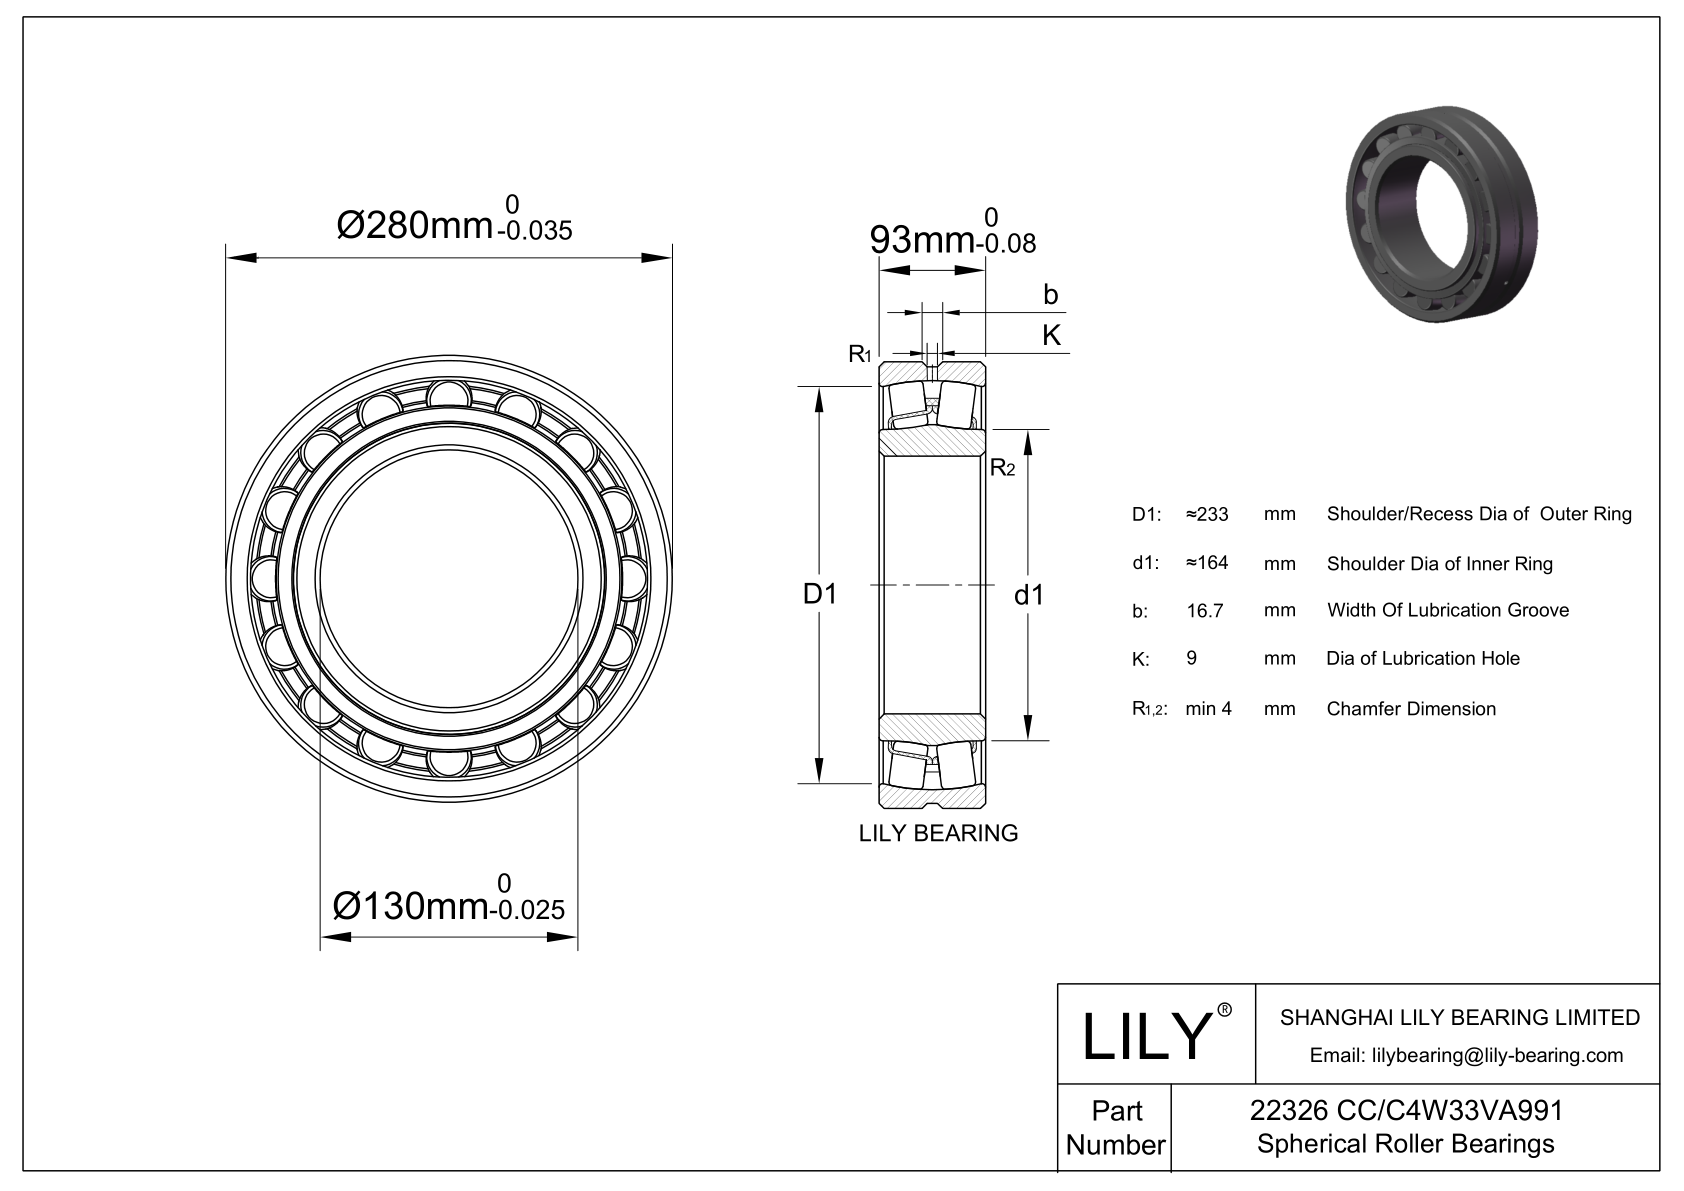 22326 CC/C4W33VA991 Double Row Spherical Roller Bearing cad drawing